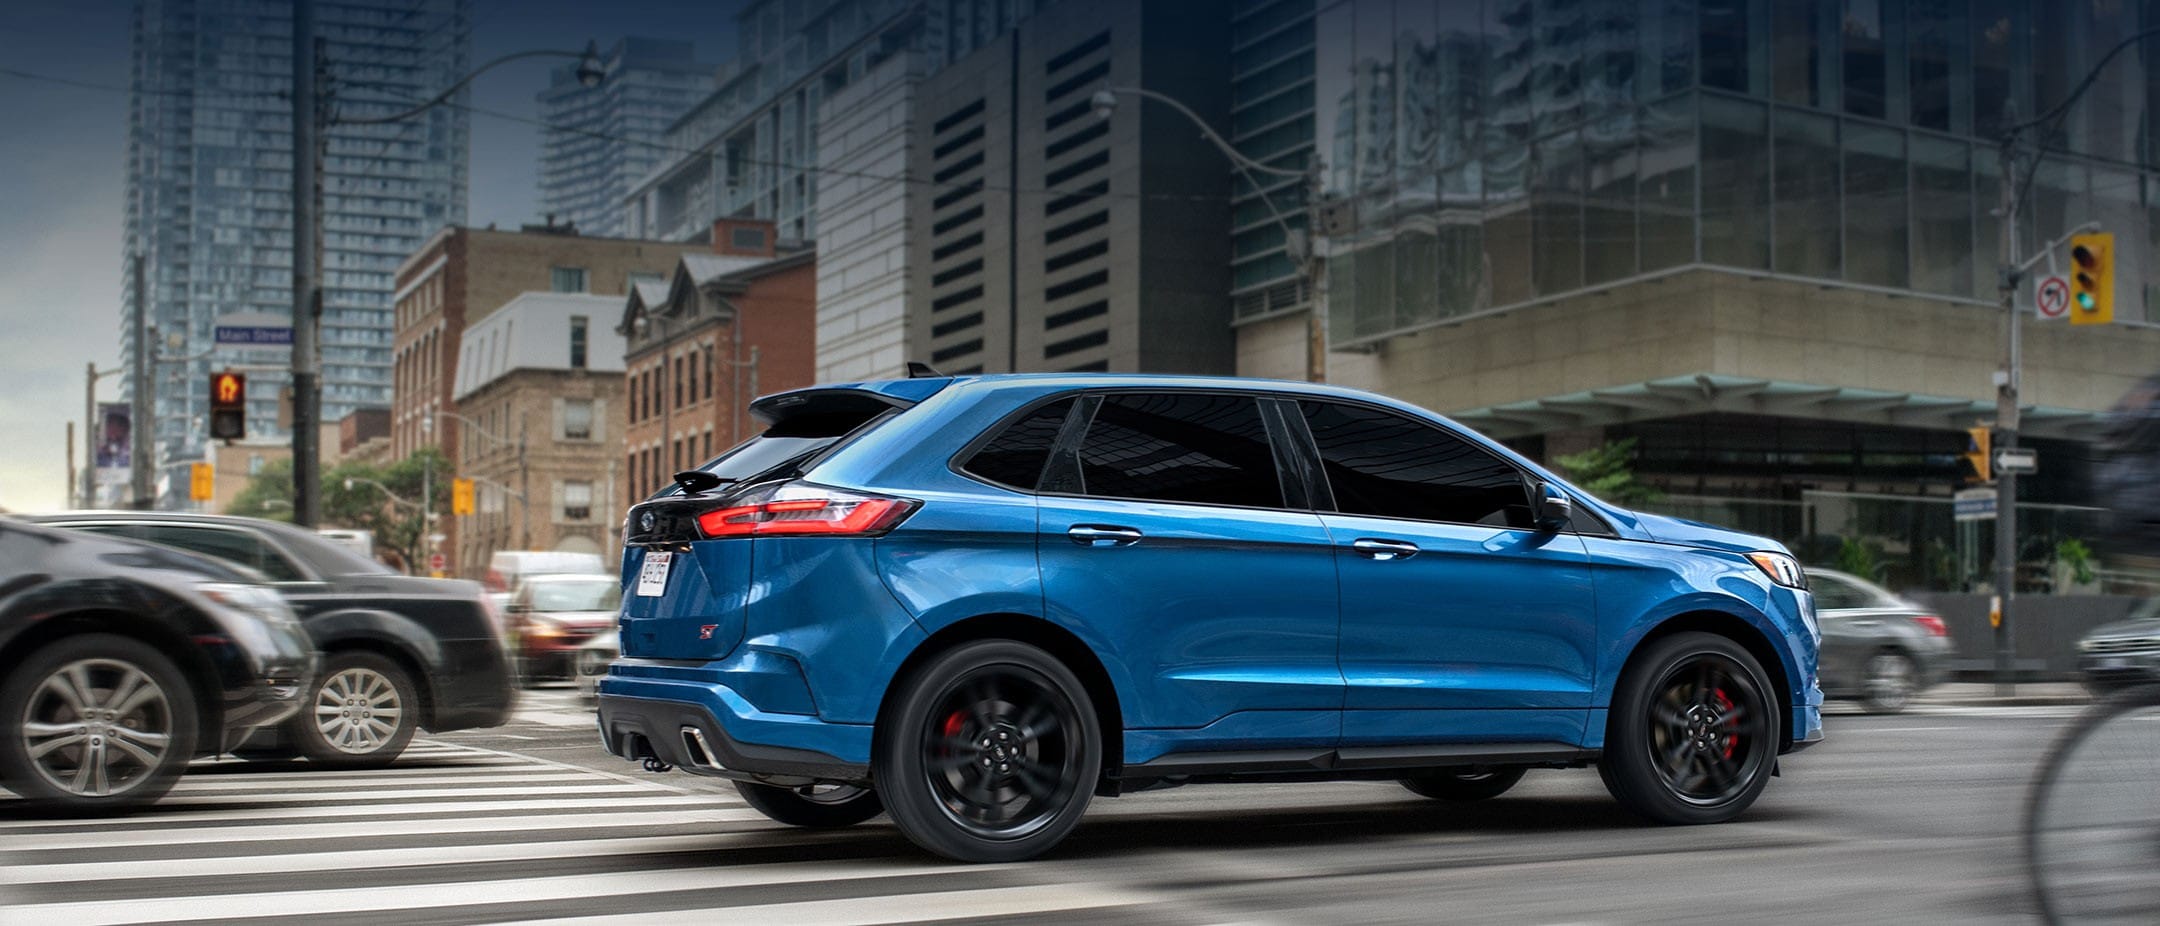 The 2019 Ford Edge ST in Ford Performance Blue driving on a city street.